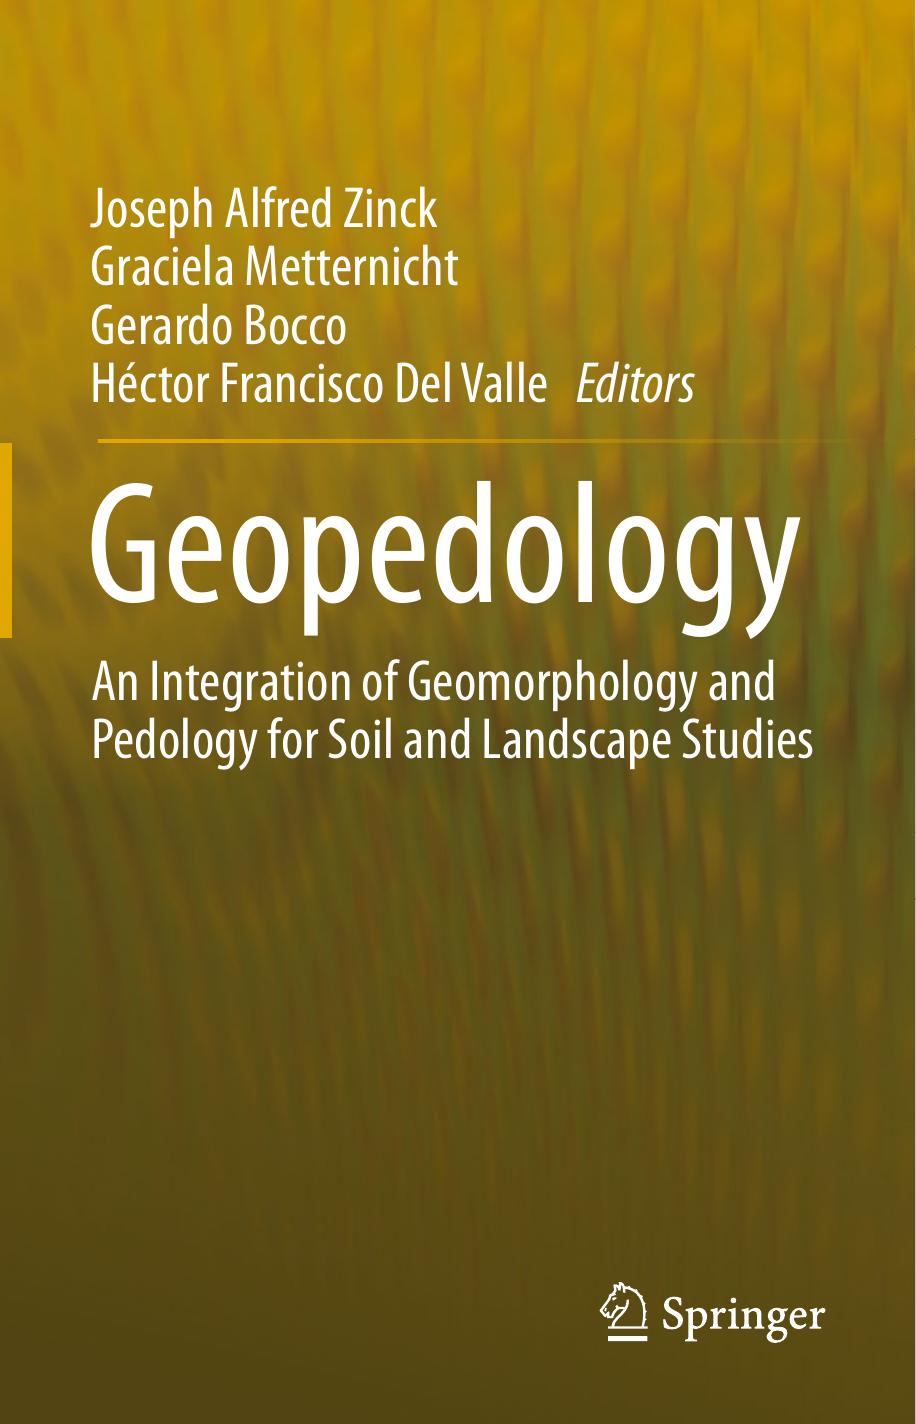 Geopedology  An Integration of Geomorphology and Pedology for Soil and Landscape Studies 2010